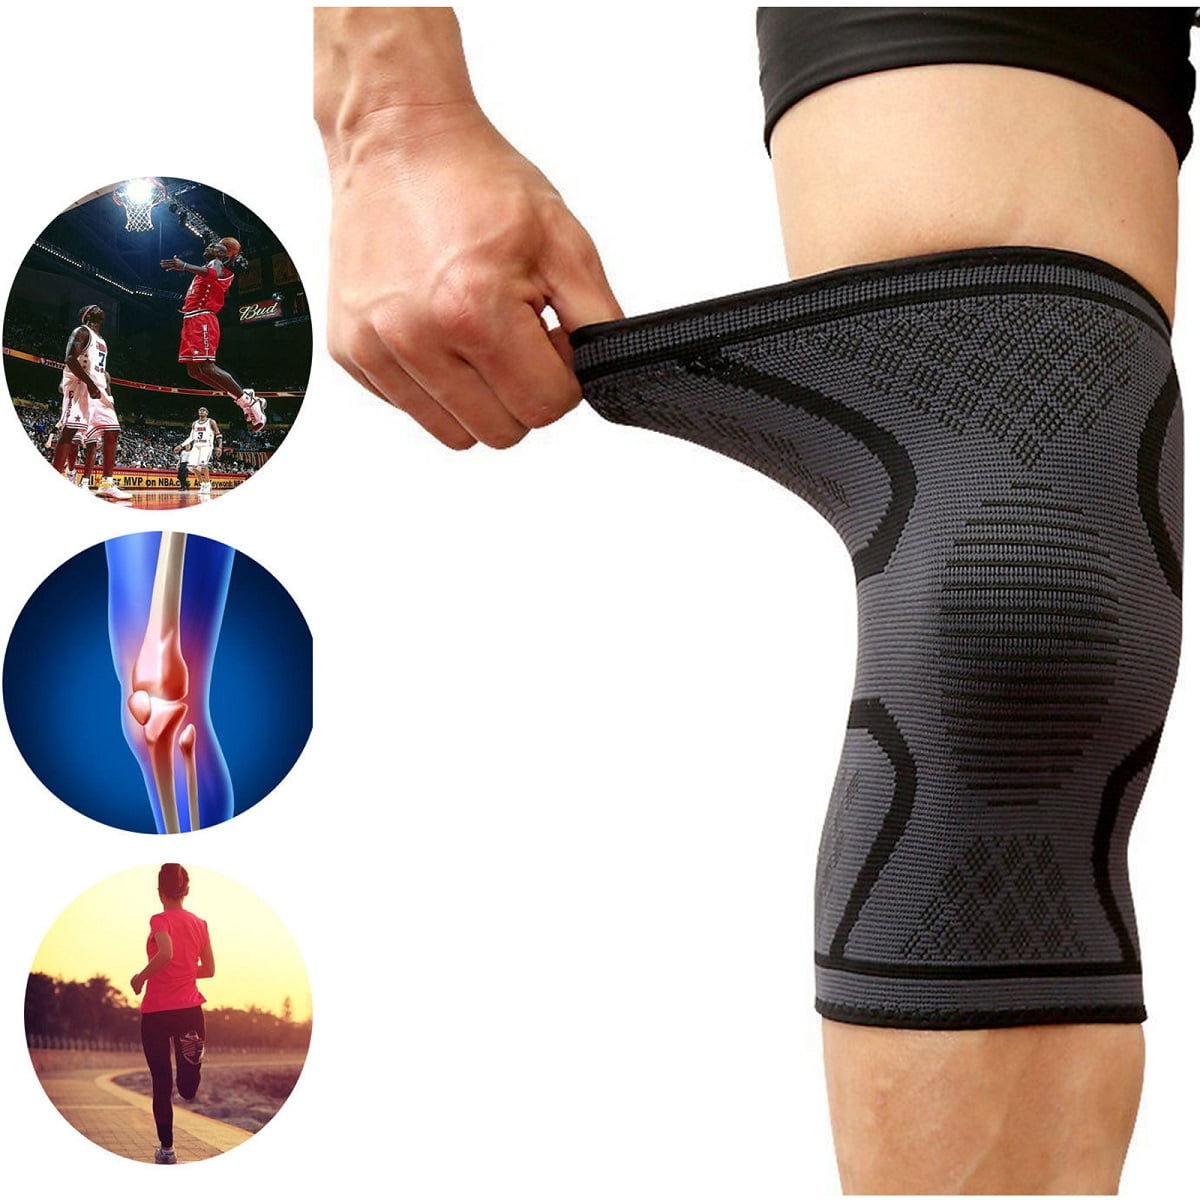 2pcs Knee Compression Sleeve Brace Support Gym Joint Pain Arthritis Relief Pair. 